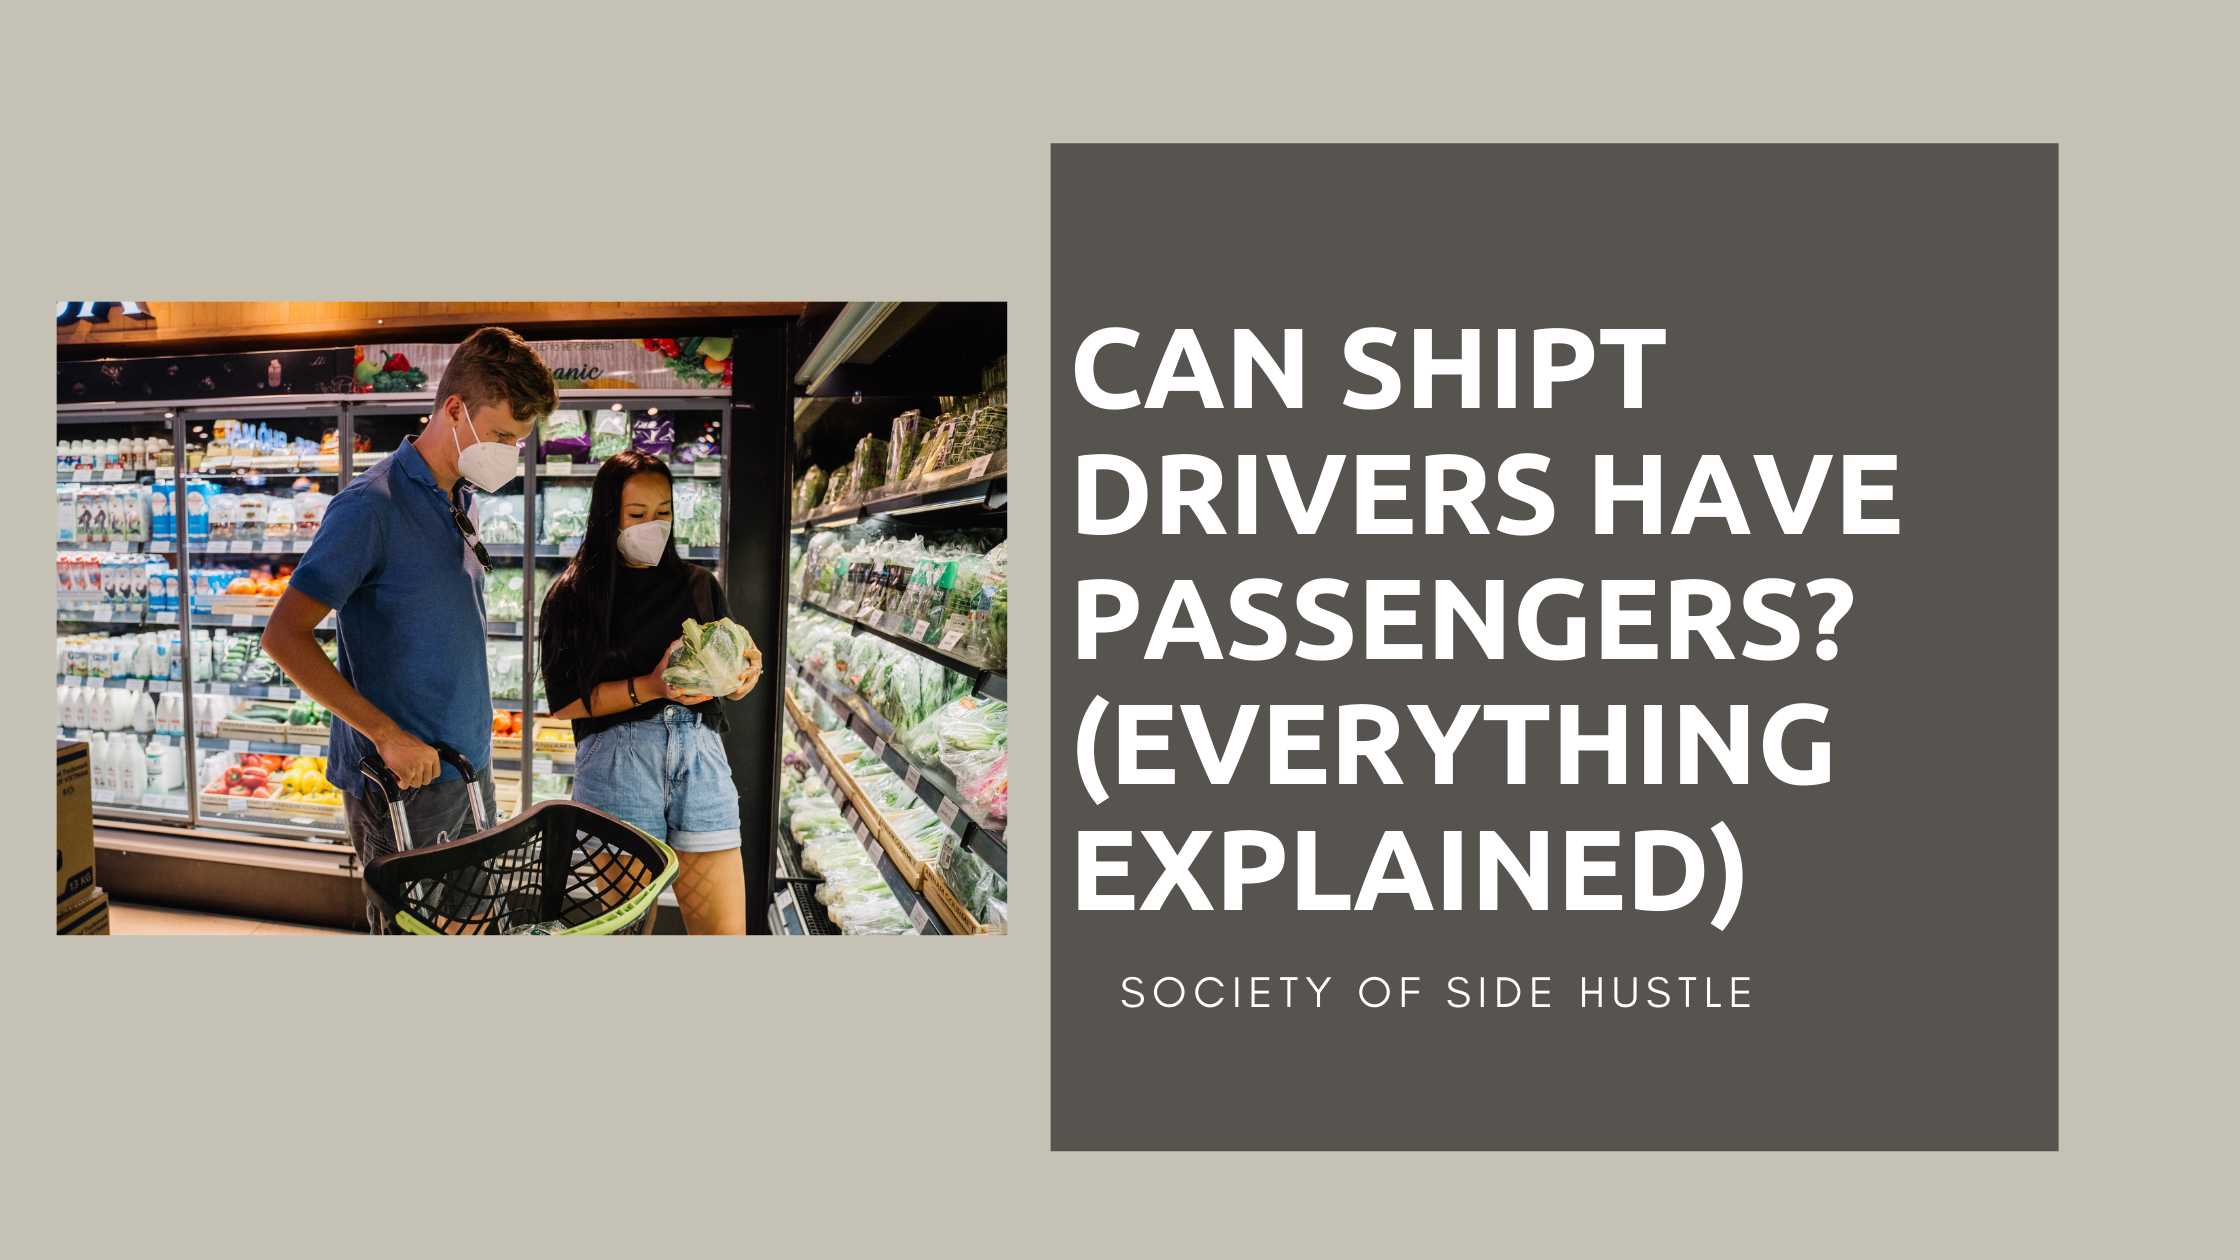 Can Shipt Drivers Have Passengers? (Everything Explained)